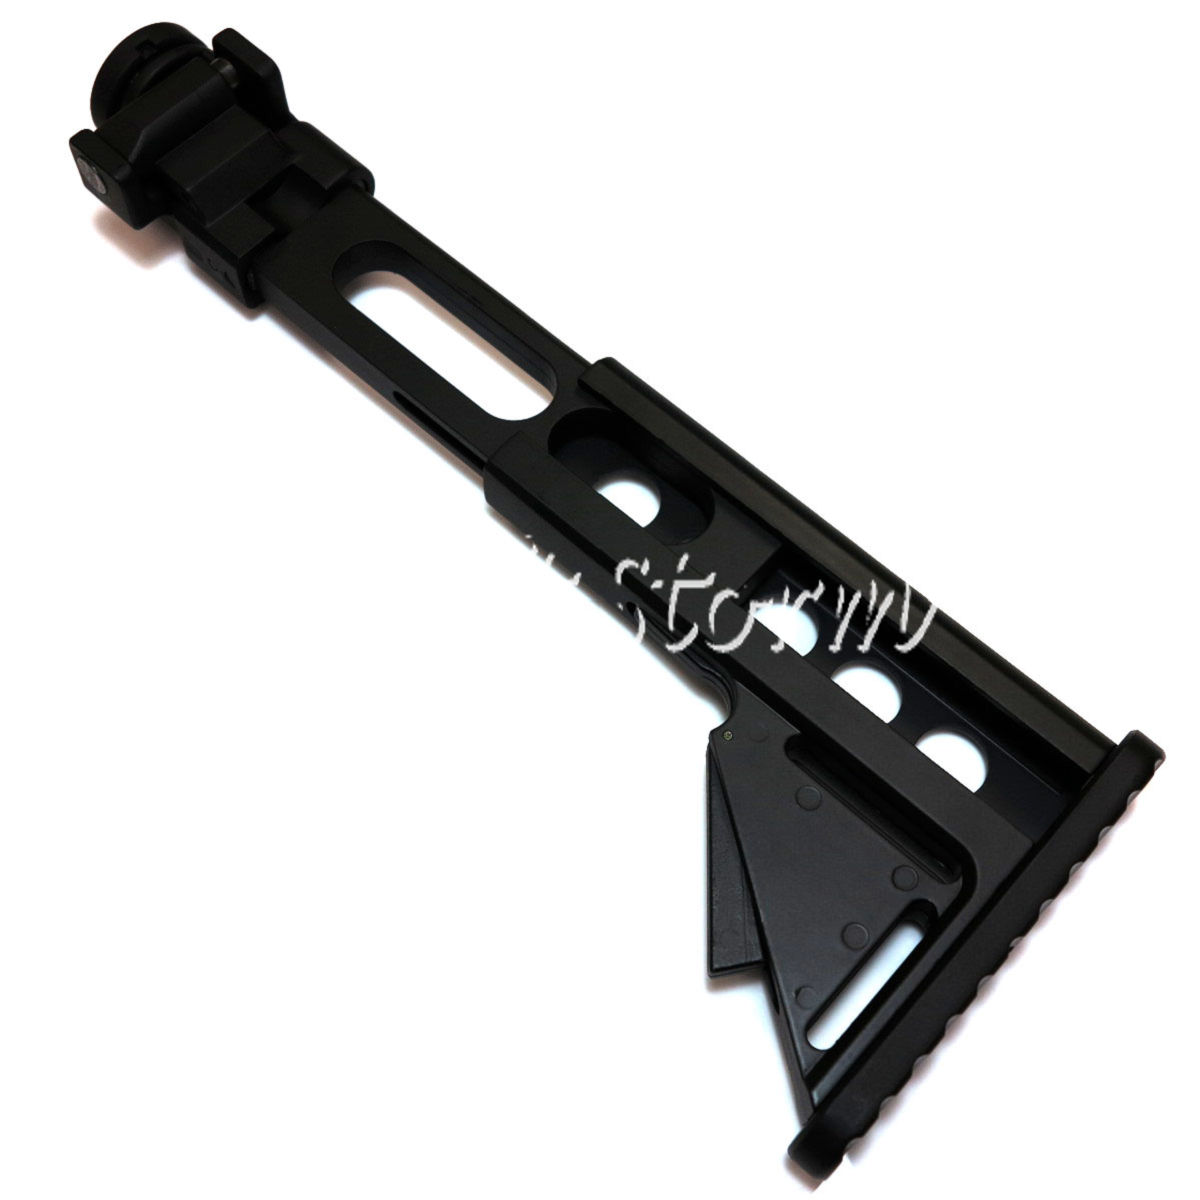 Airsoft Tactical Gear D-Boys LR-300 Metal Extendable Folding Stock for M4/M16 Black